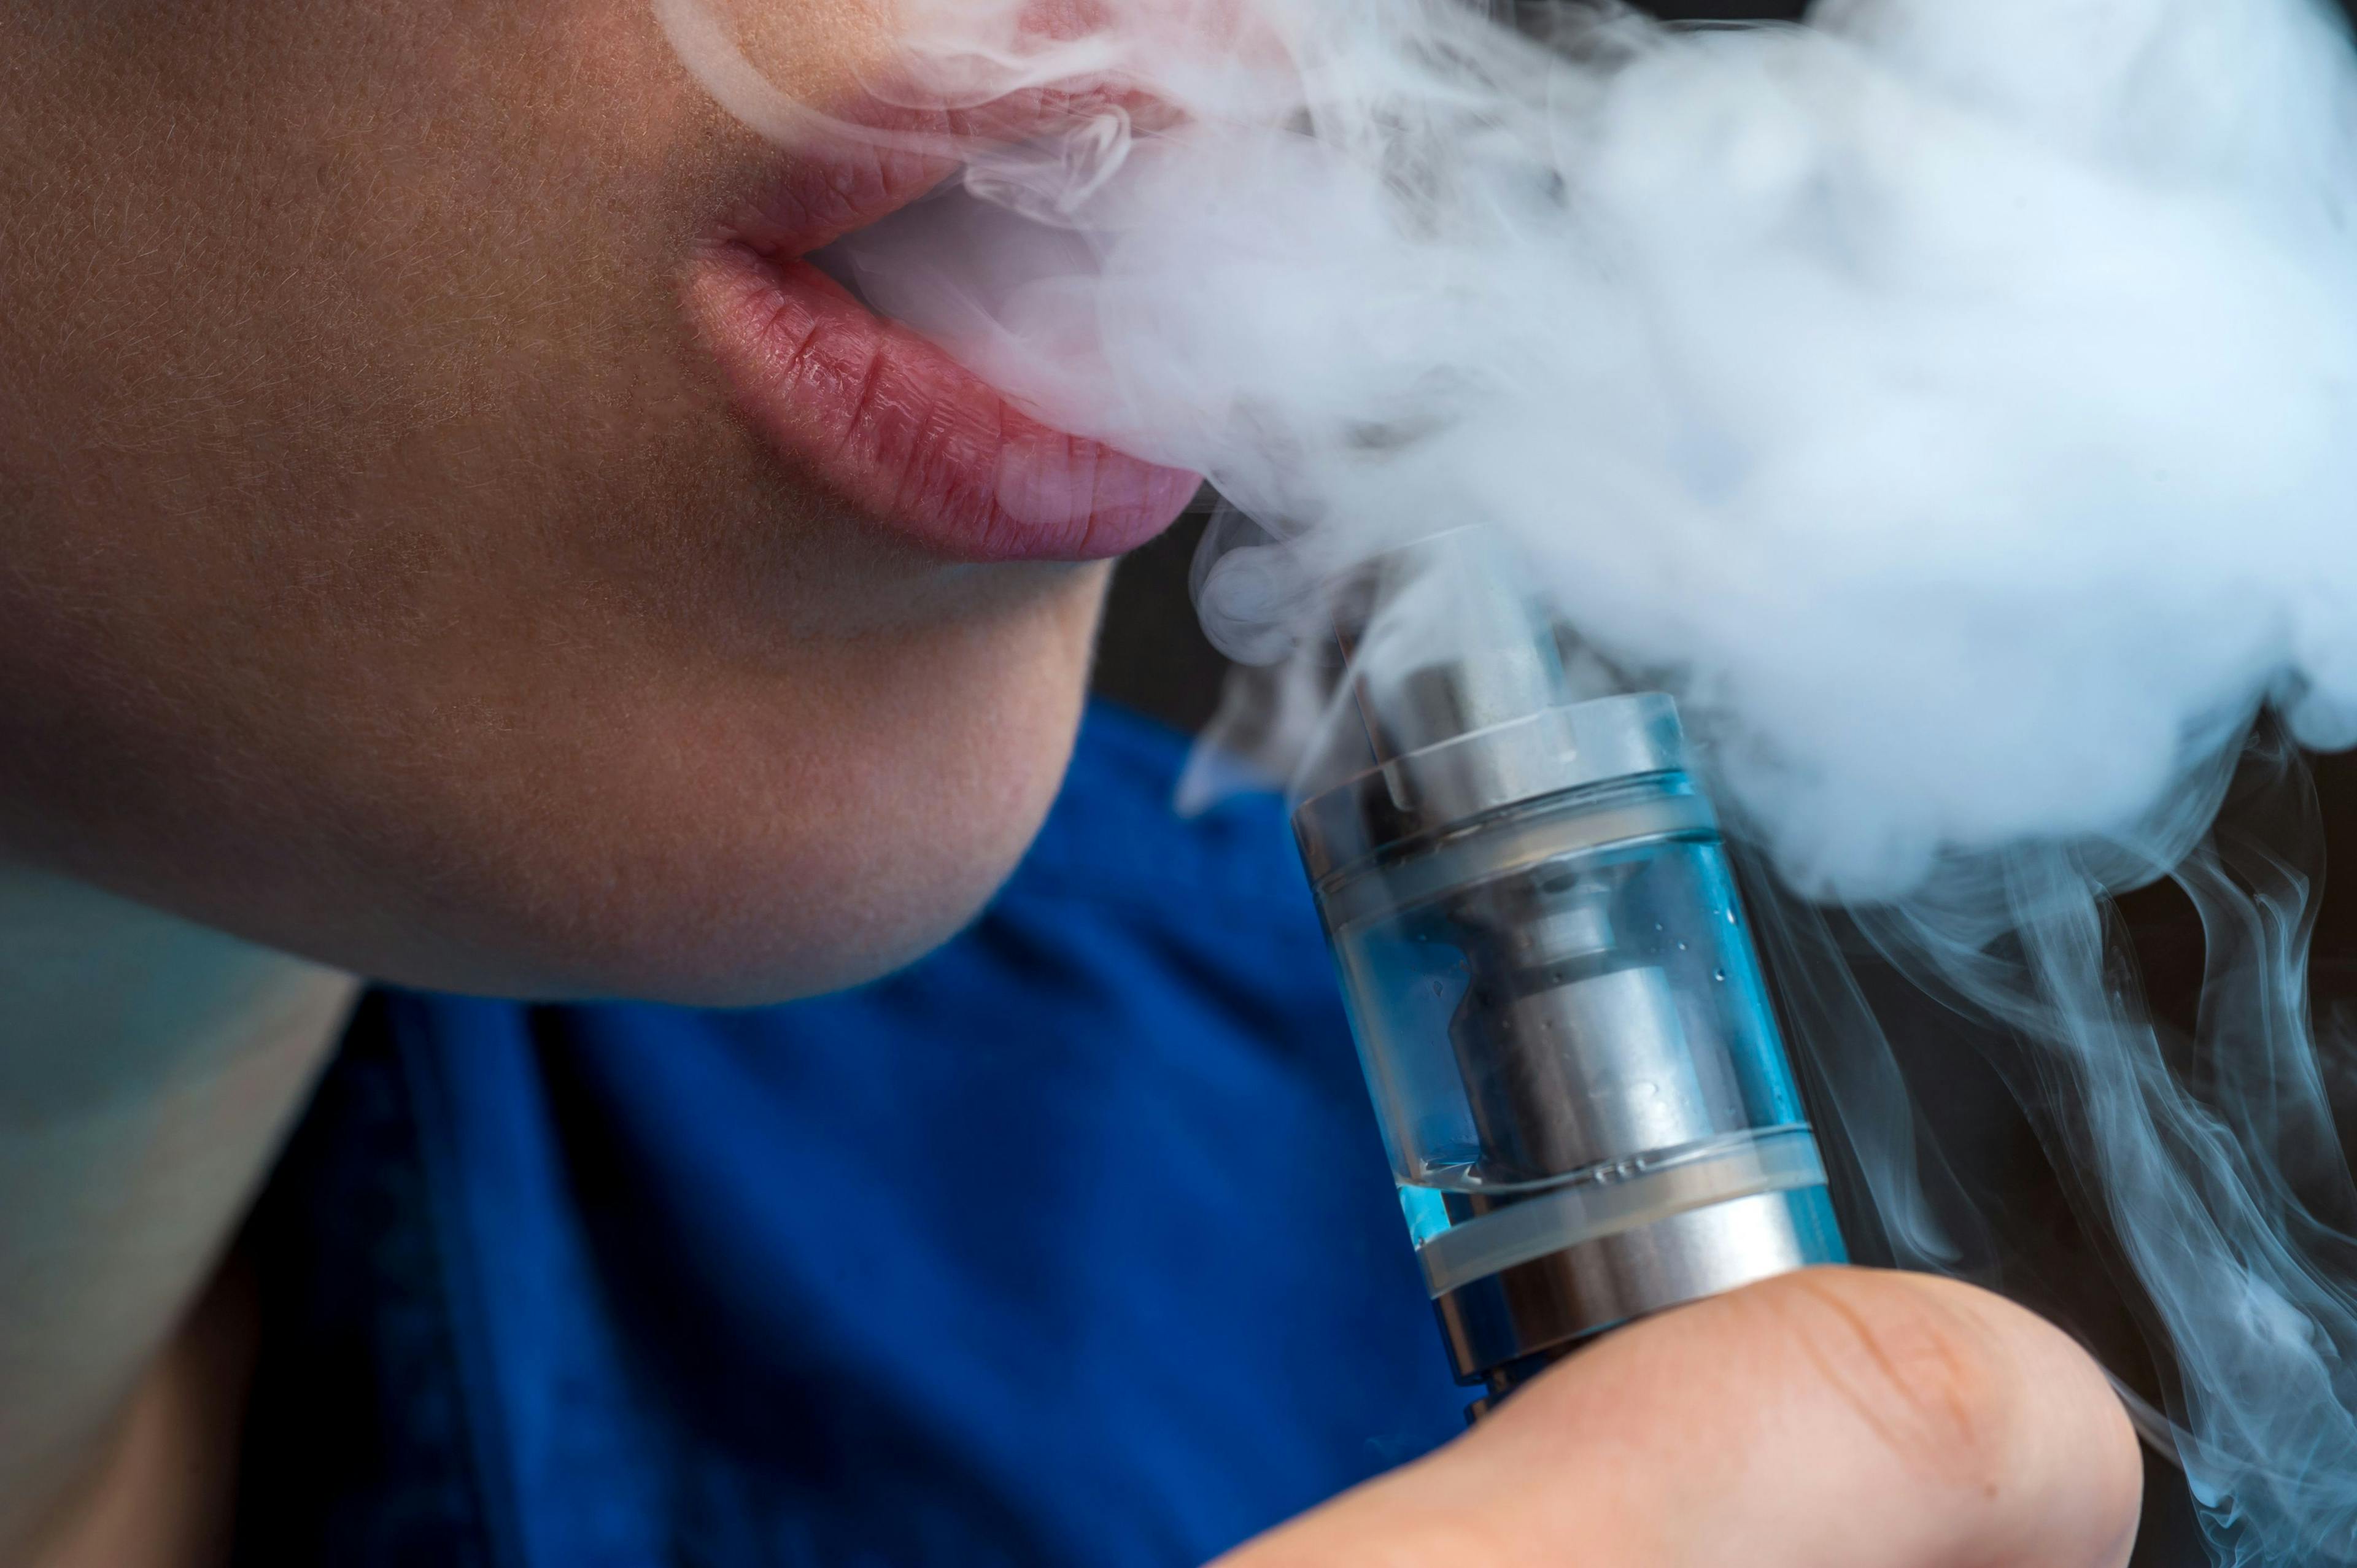 E-cigarette use increased among middle and high schoolers